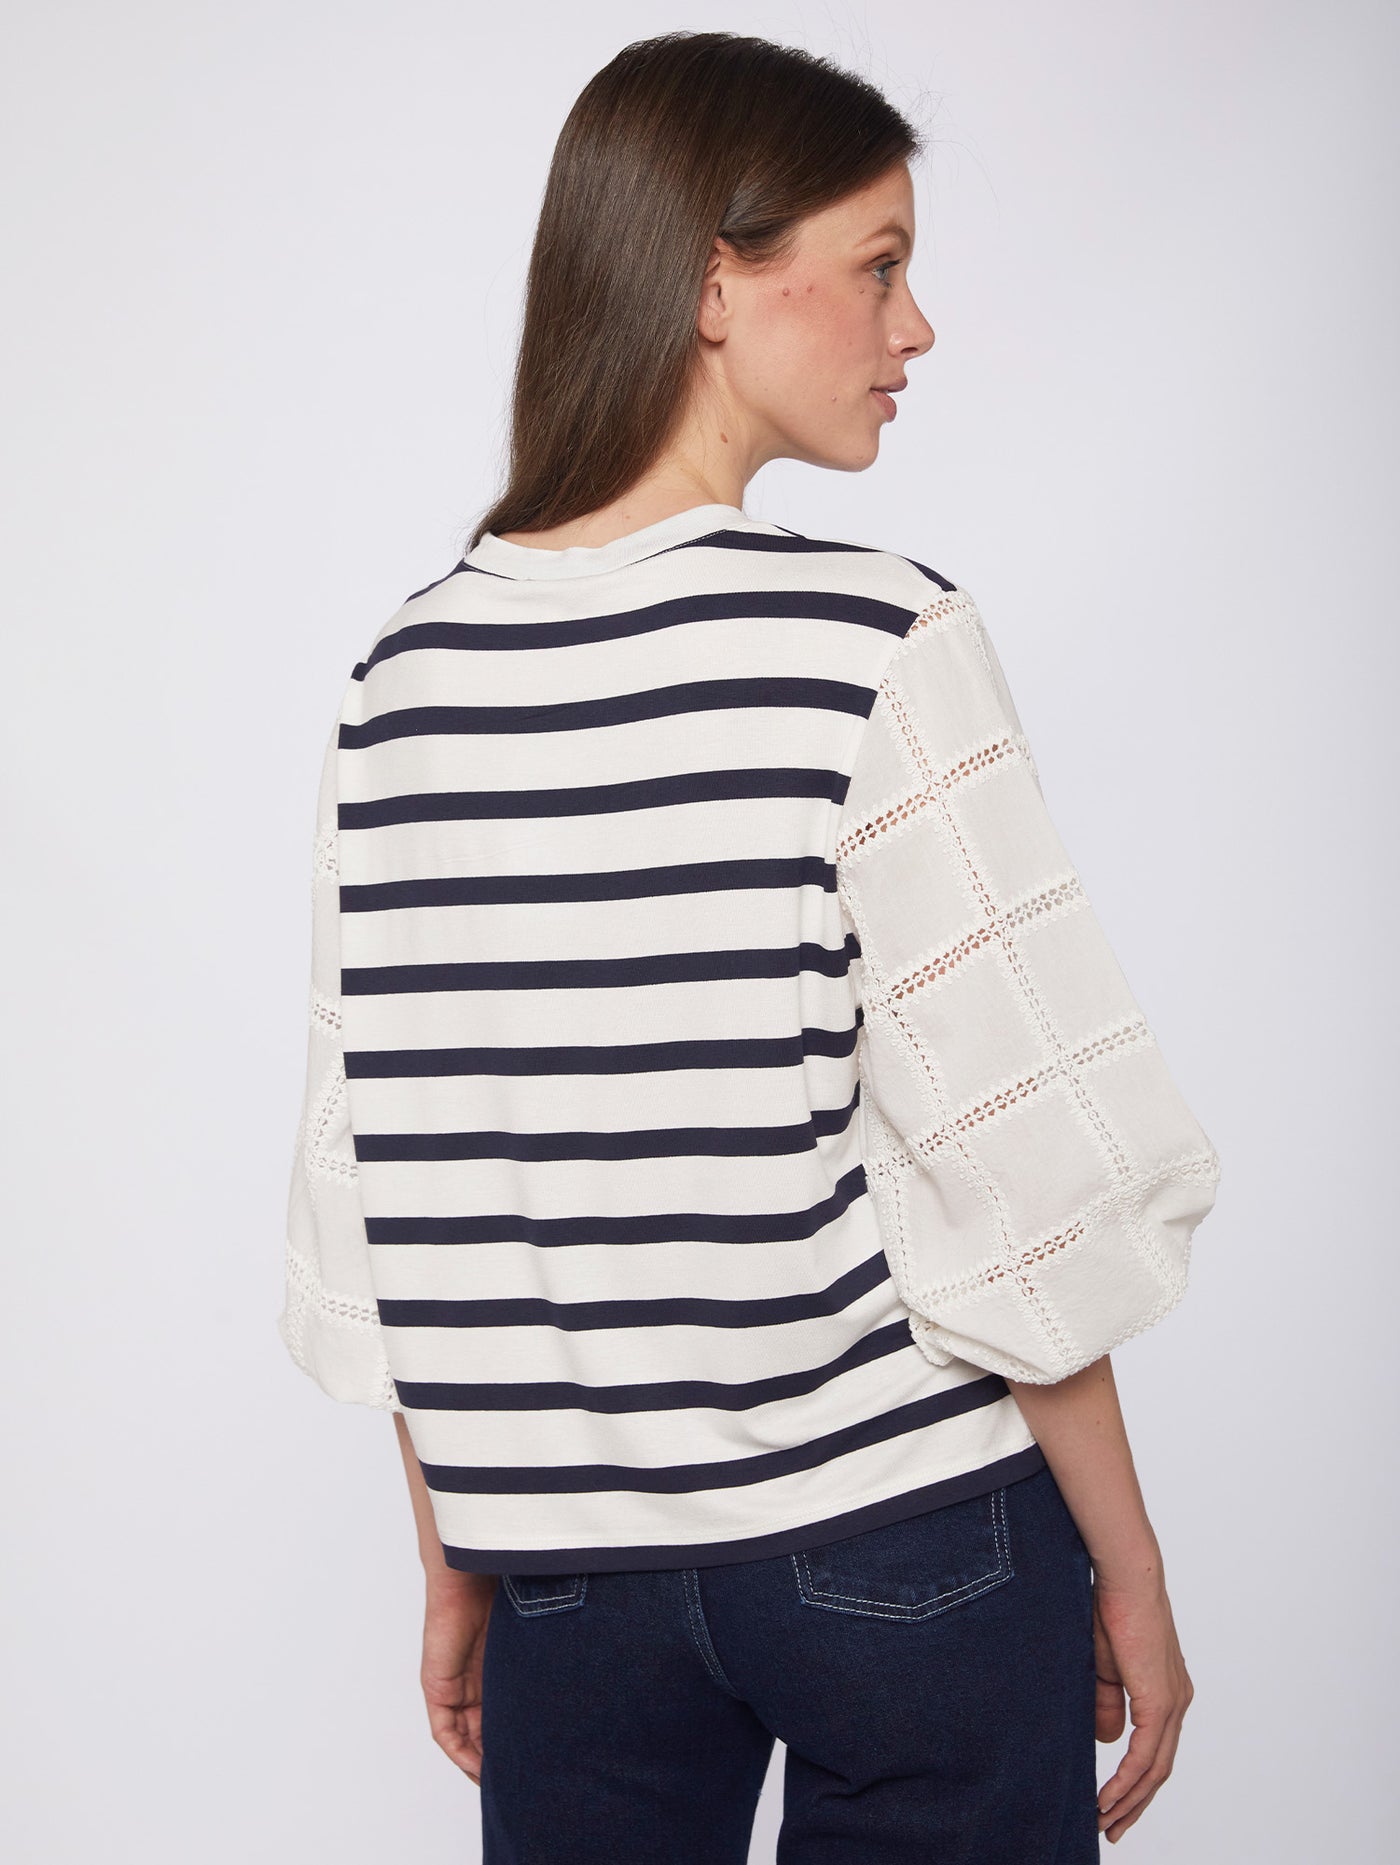 Eugens Embroidery Sleeve Top